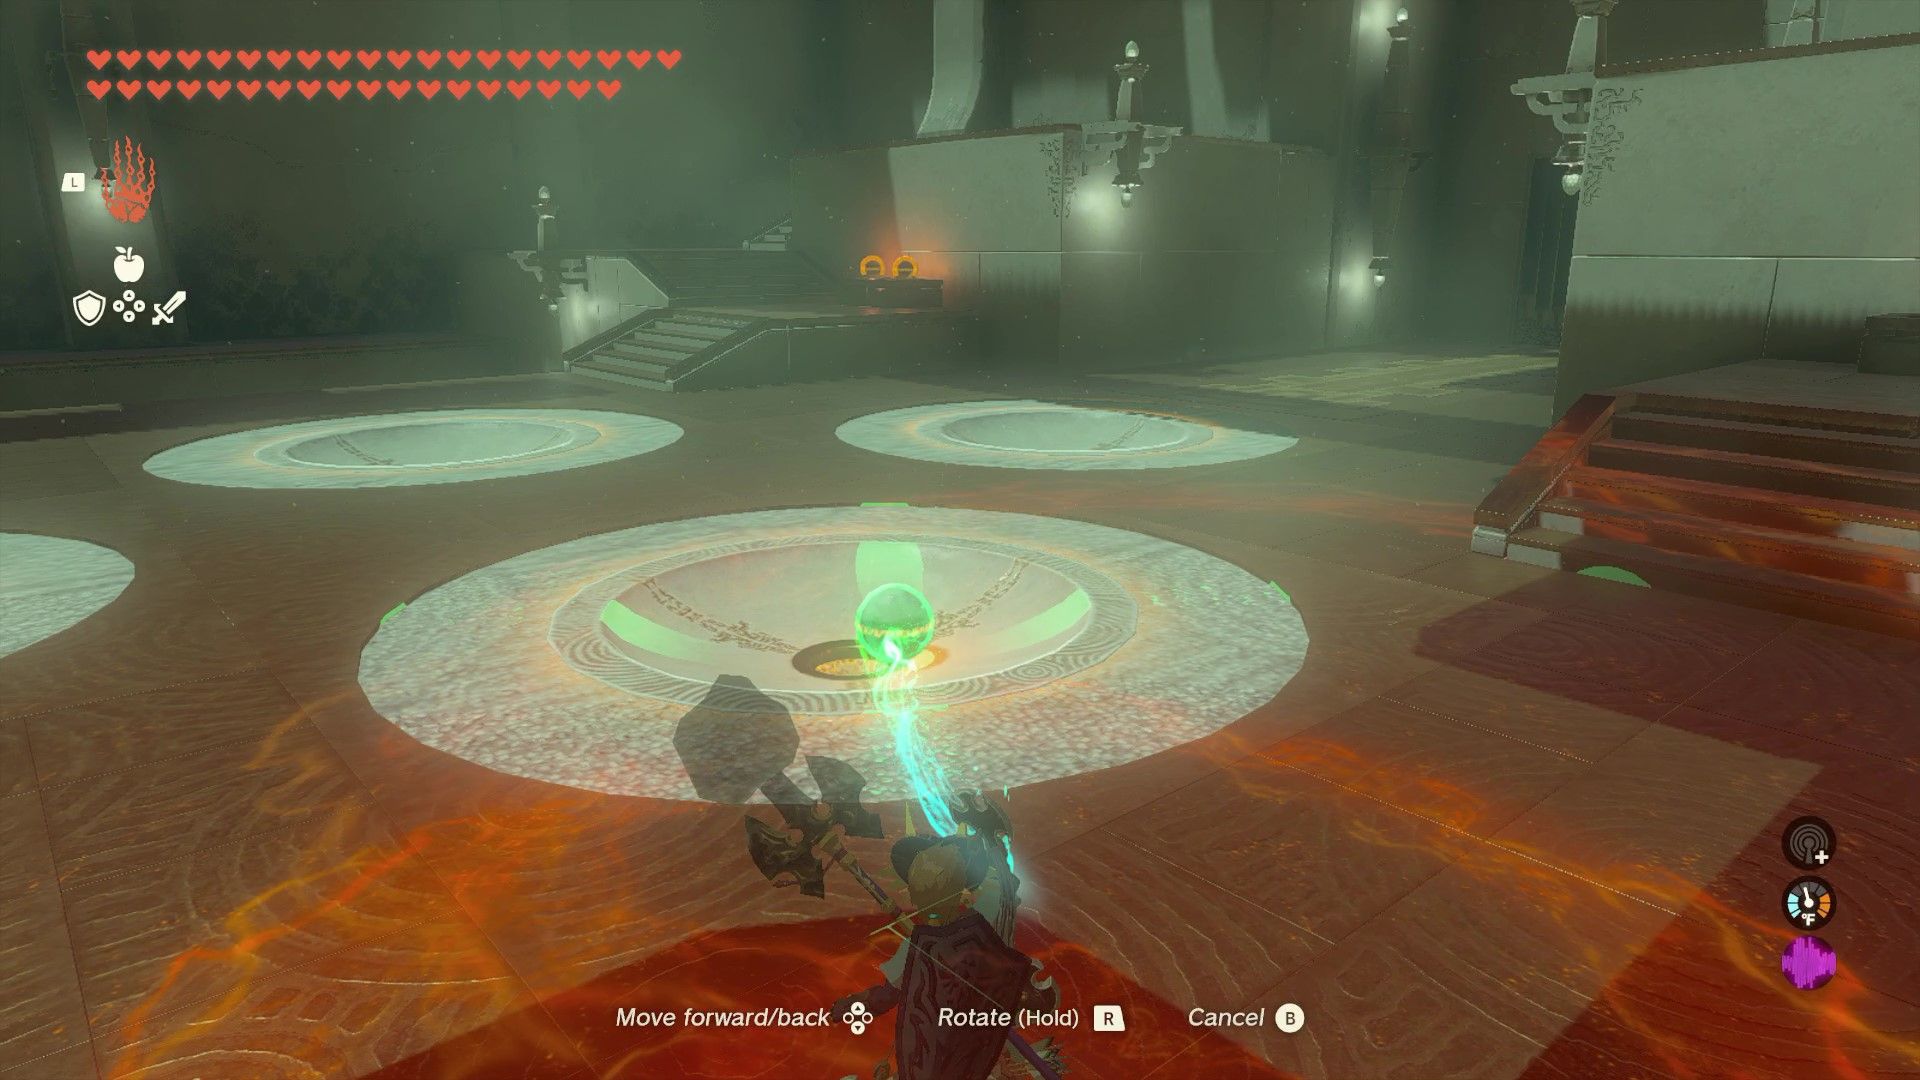 Link solving Kyokugon Shrine’s puzzle in The Legend of Zelda: Tears of the Kingdom